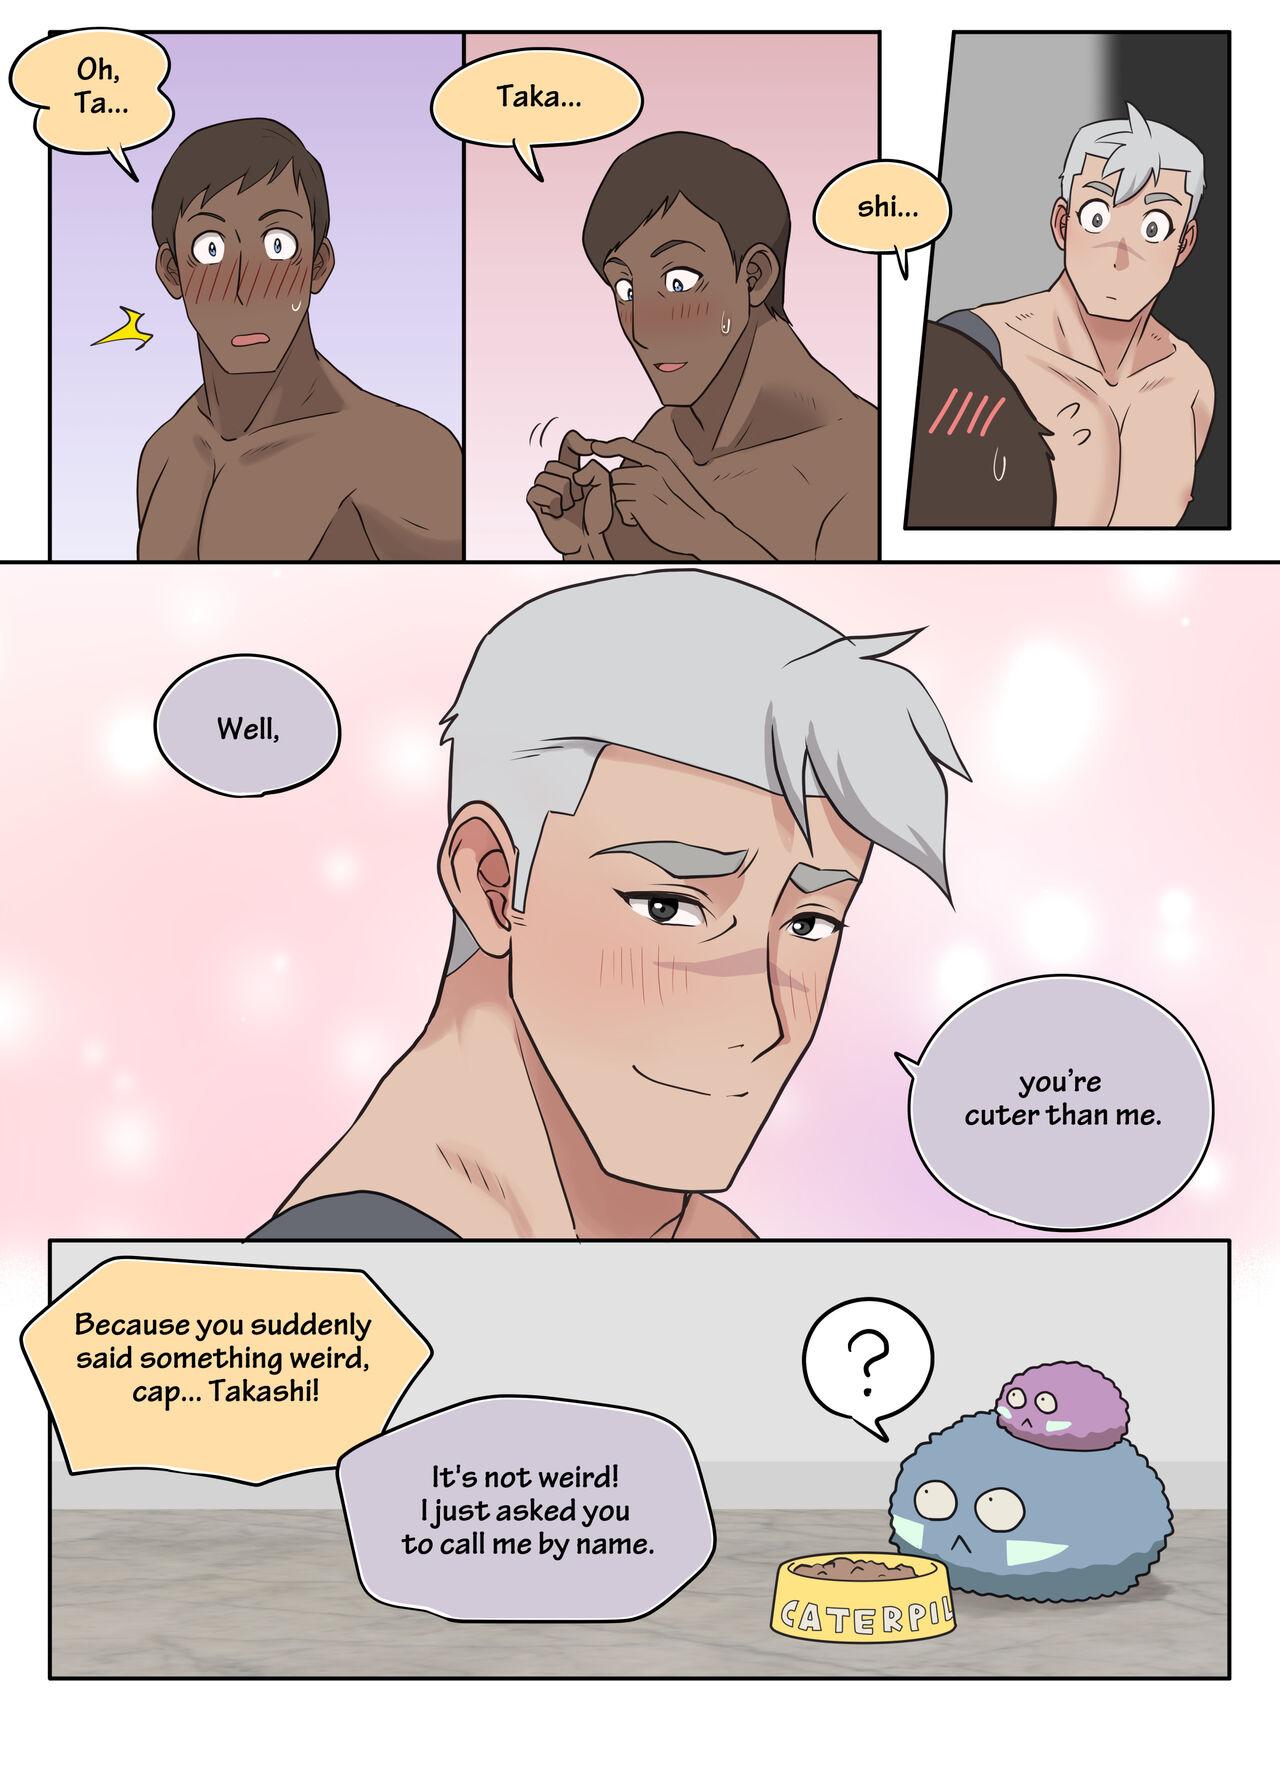 Public Nudity Captain, You’re so CUTE! - Voltron American - Page 26